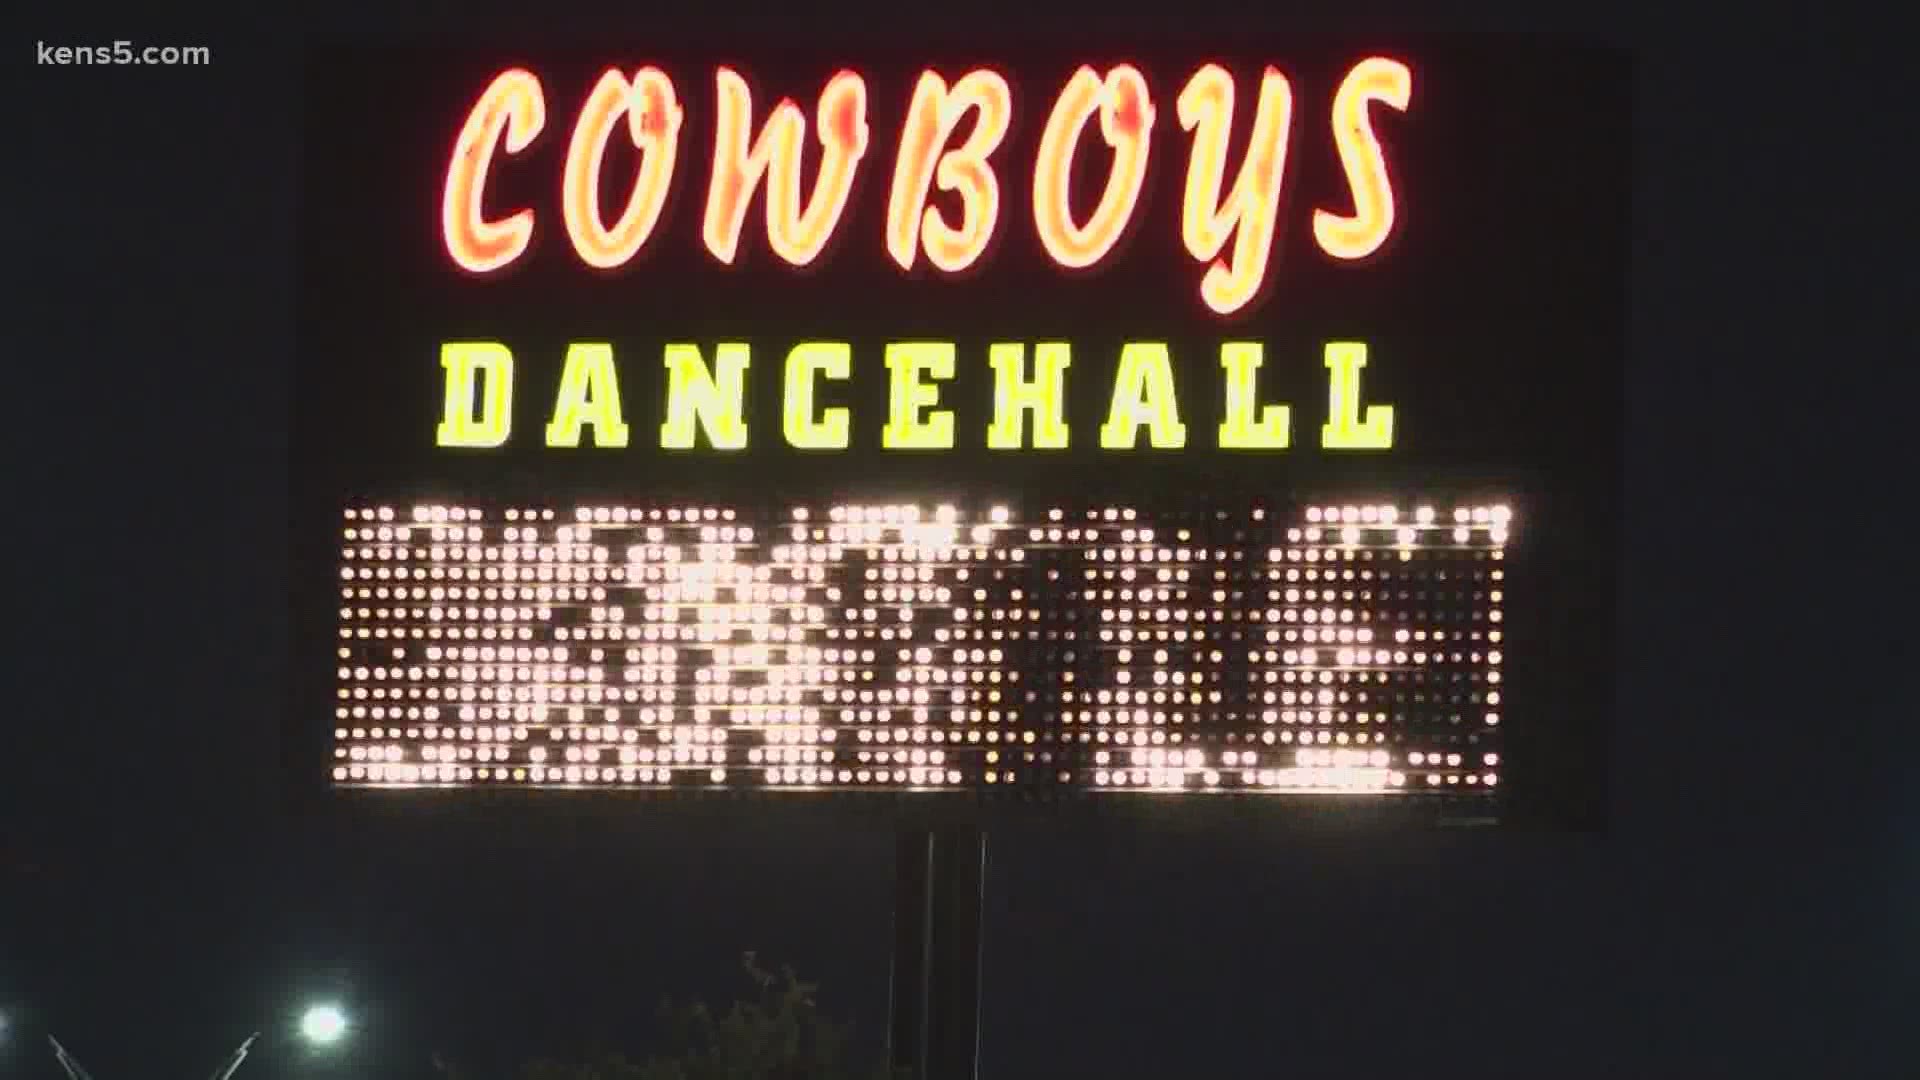 There's no music, no drinks and no dancing. So why are people still showing up at Cowboys Dancehall?